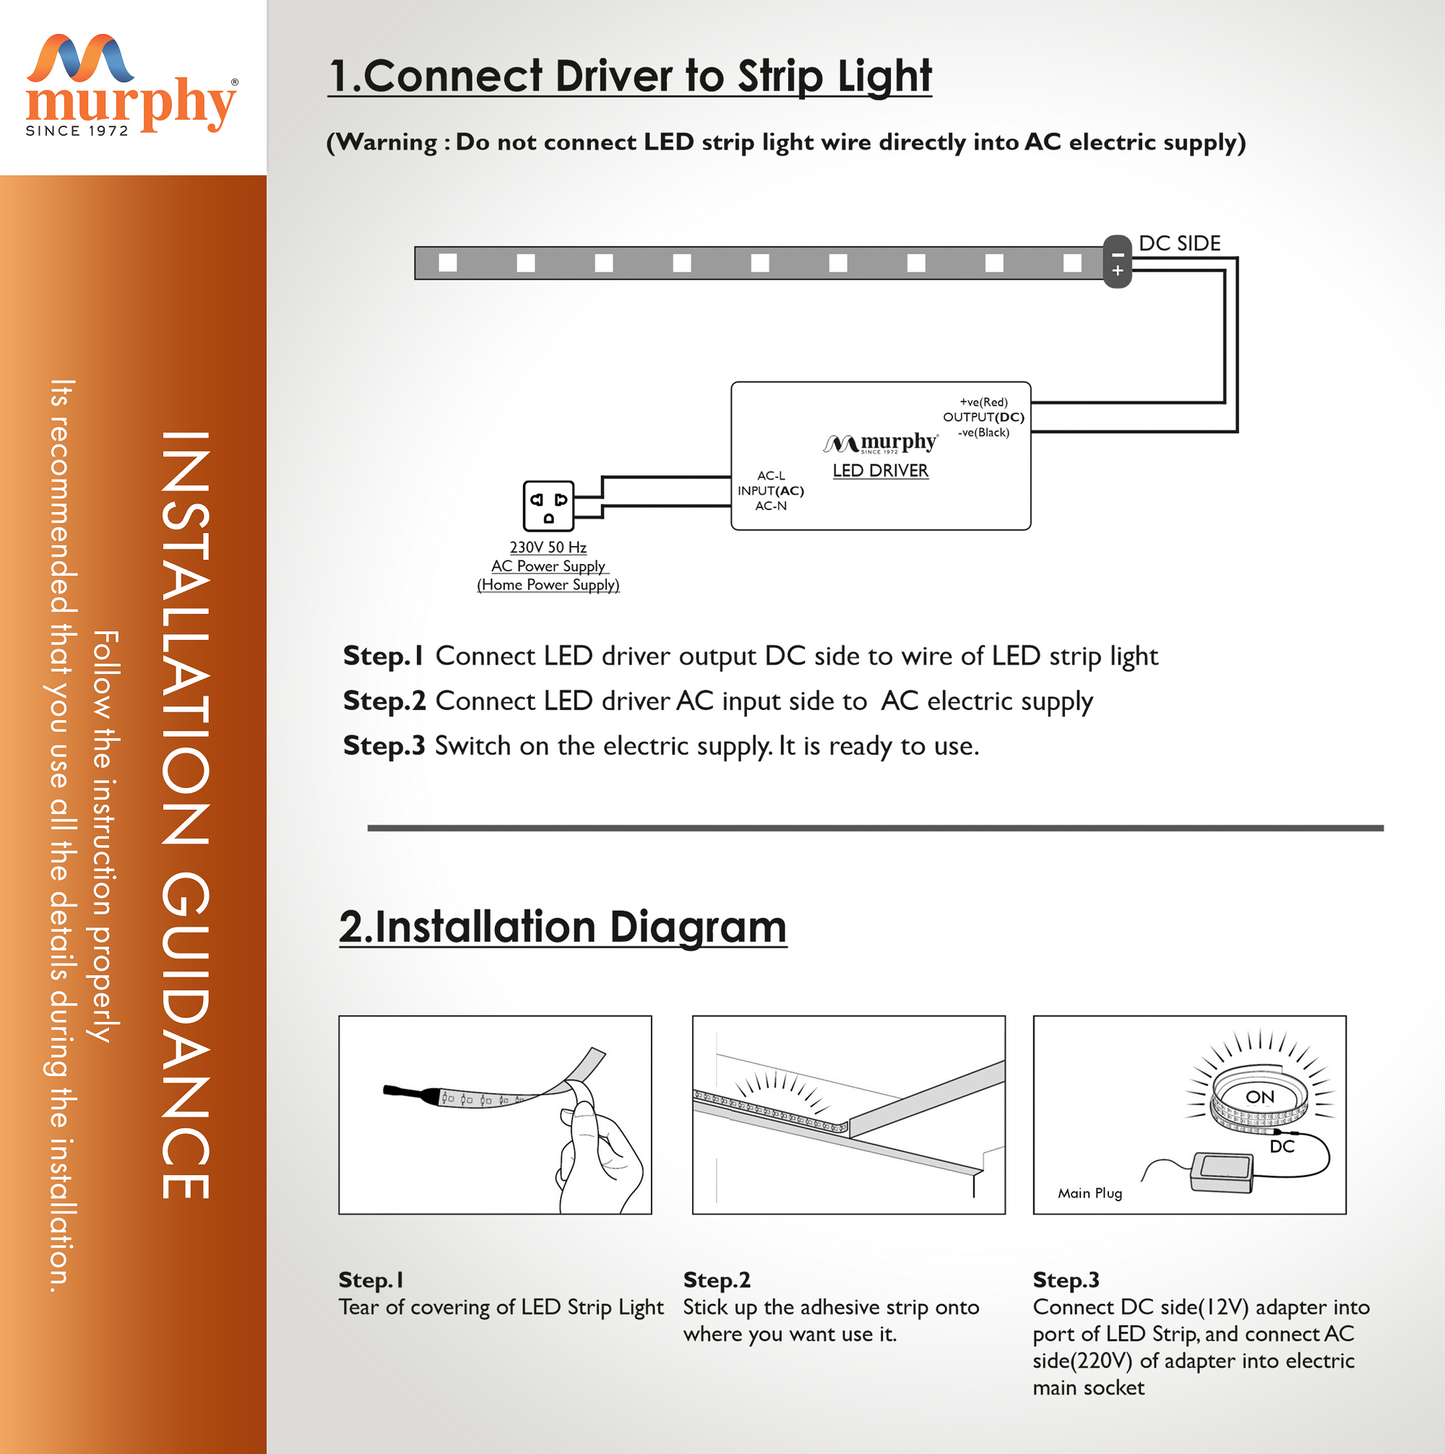 LED STRIP LIGHT 120 LED/Mtr. WITH DRIVER